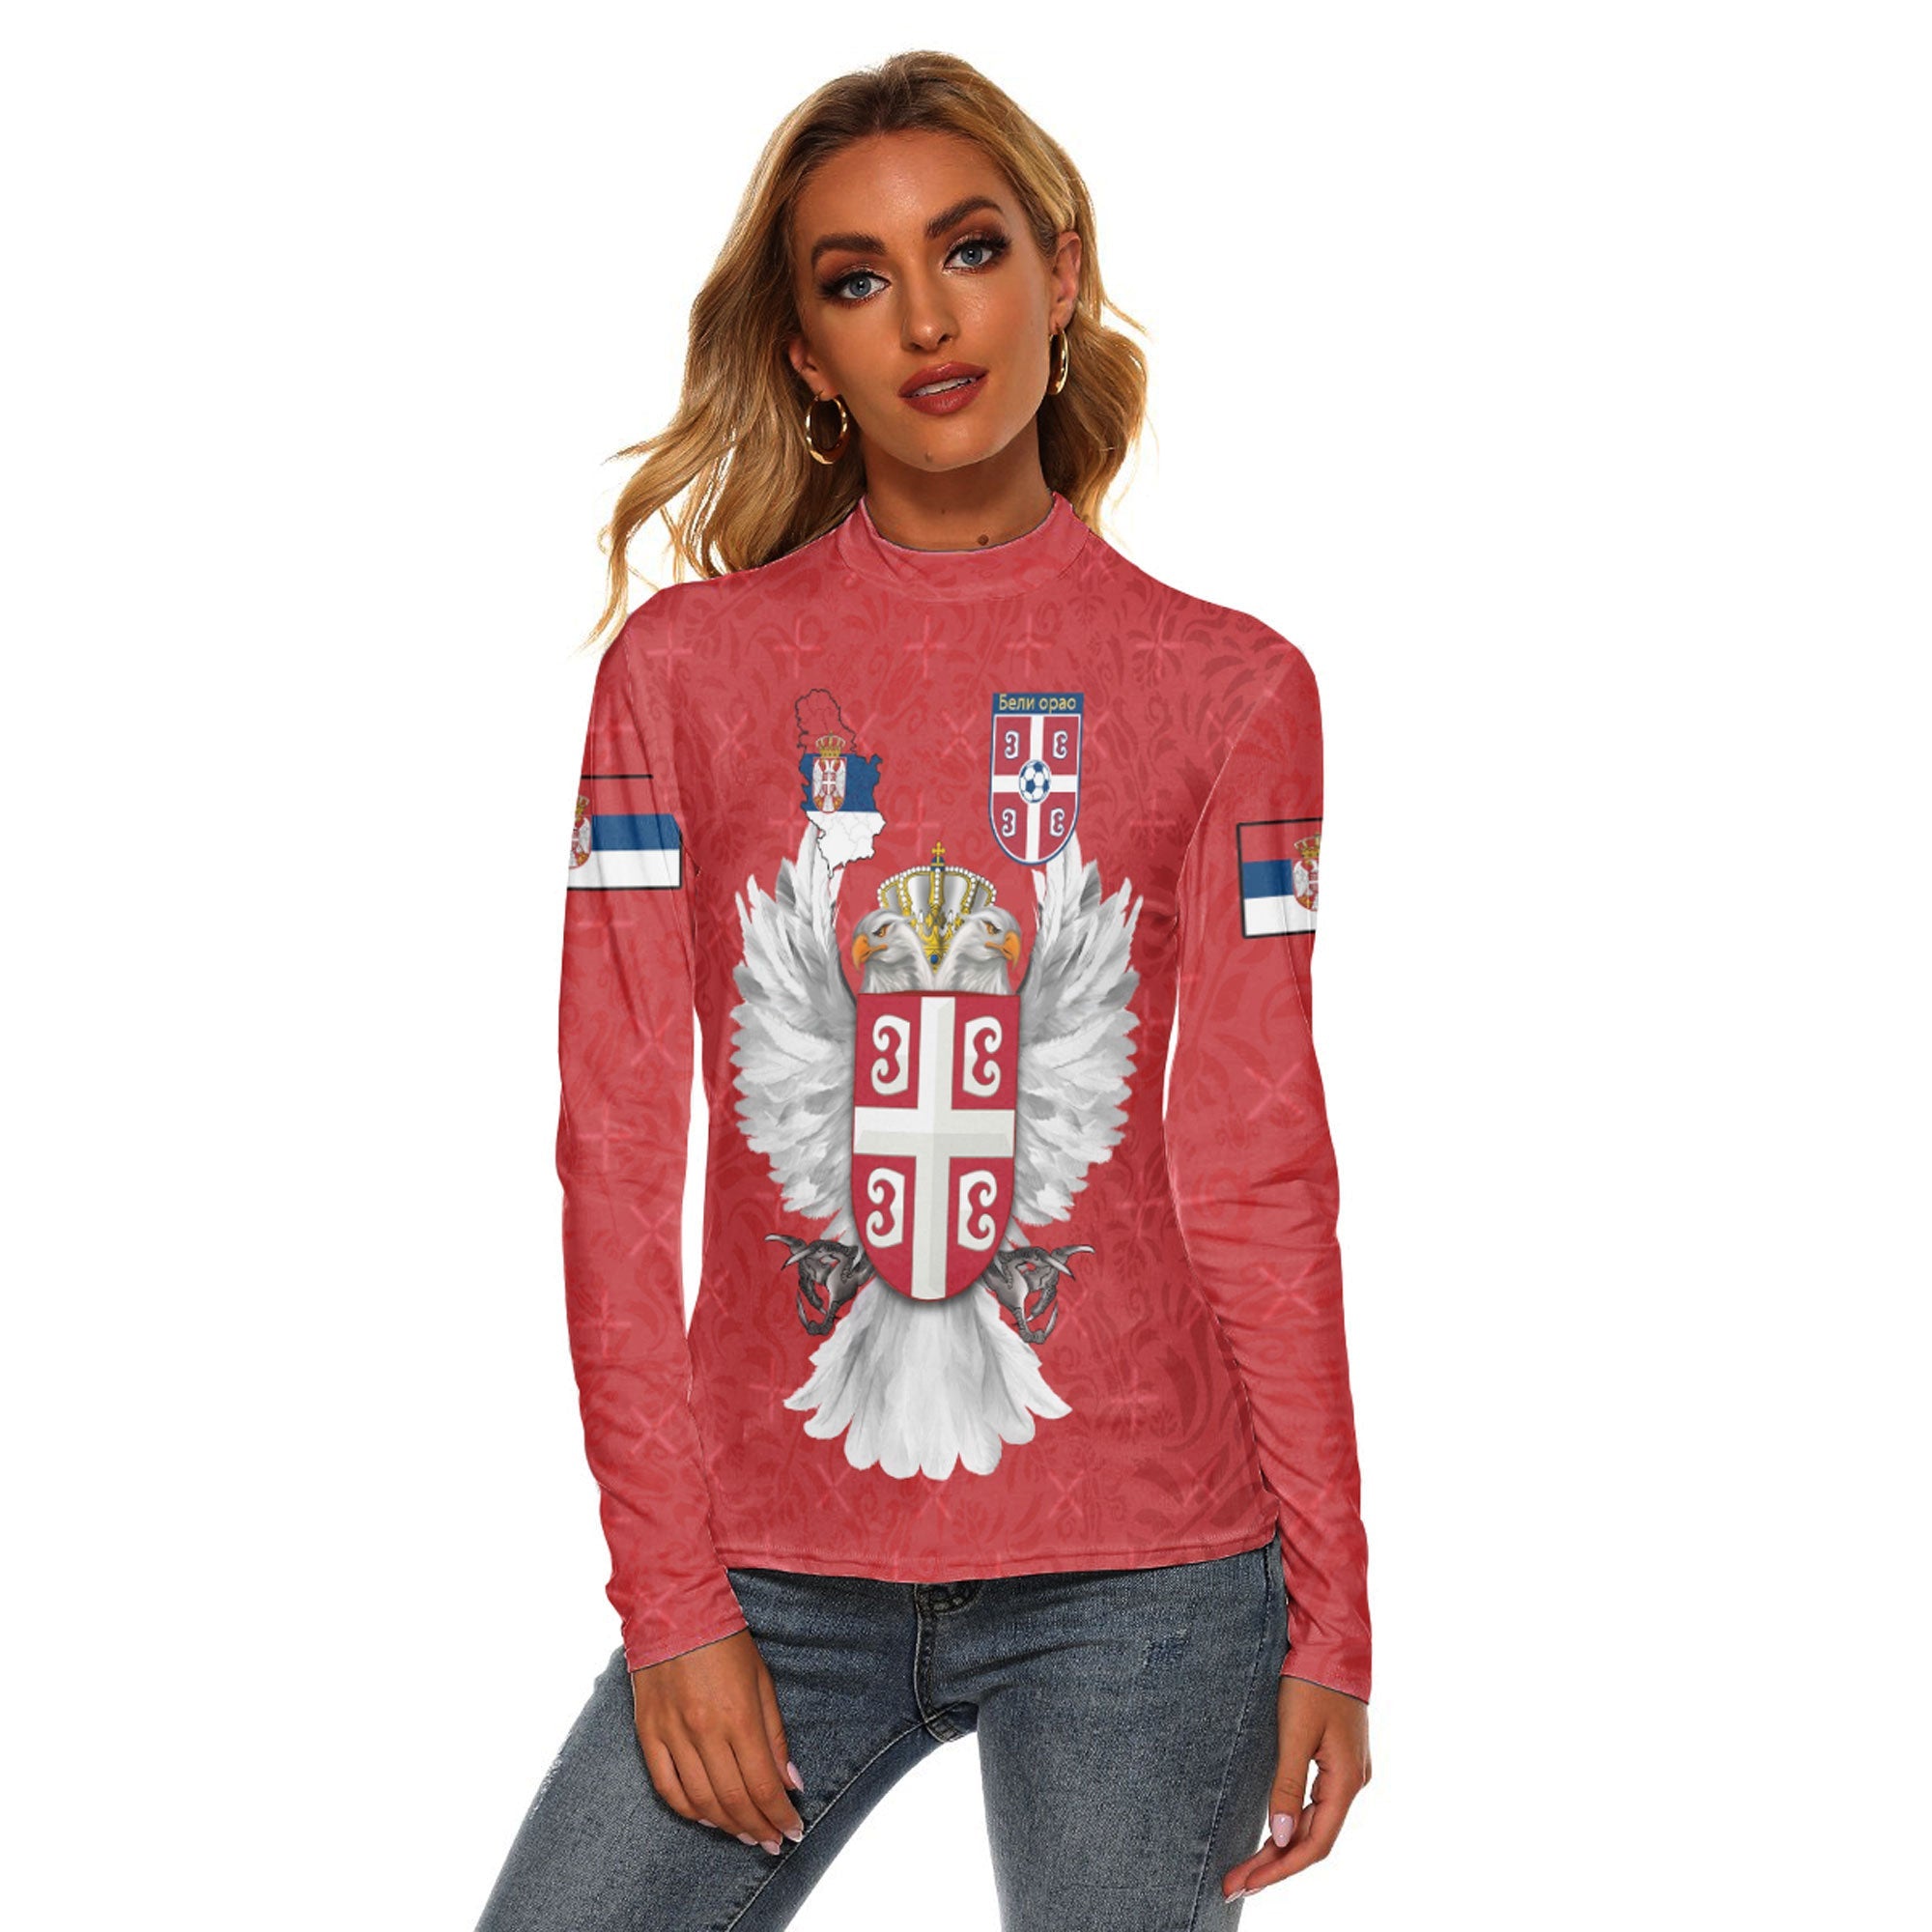 serbia-sport-symbol-style-womens-stretchable-turtleneck-top